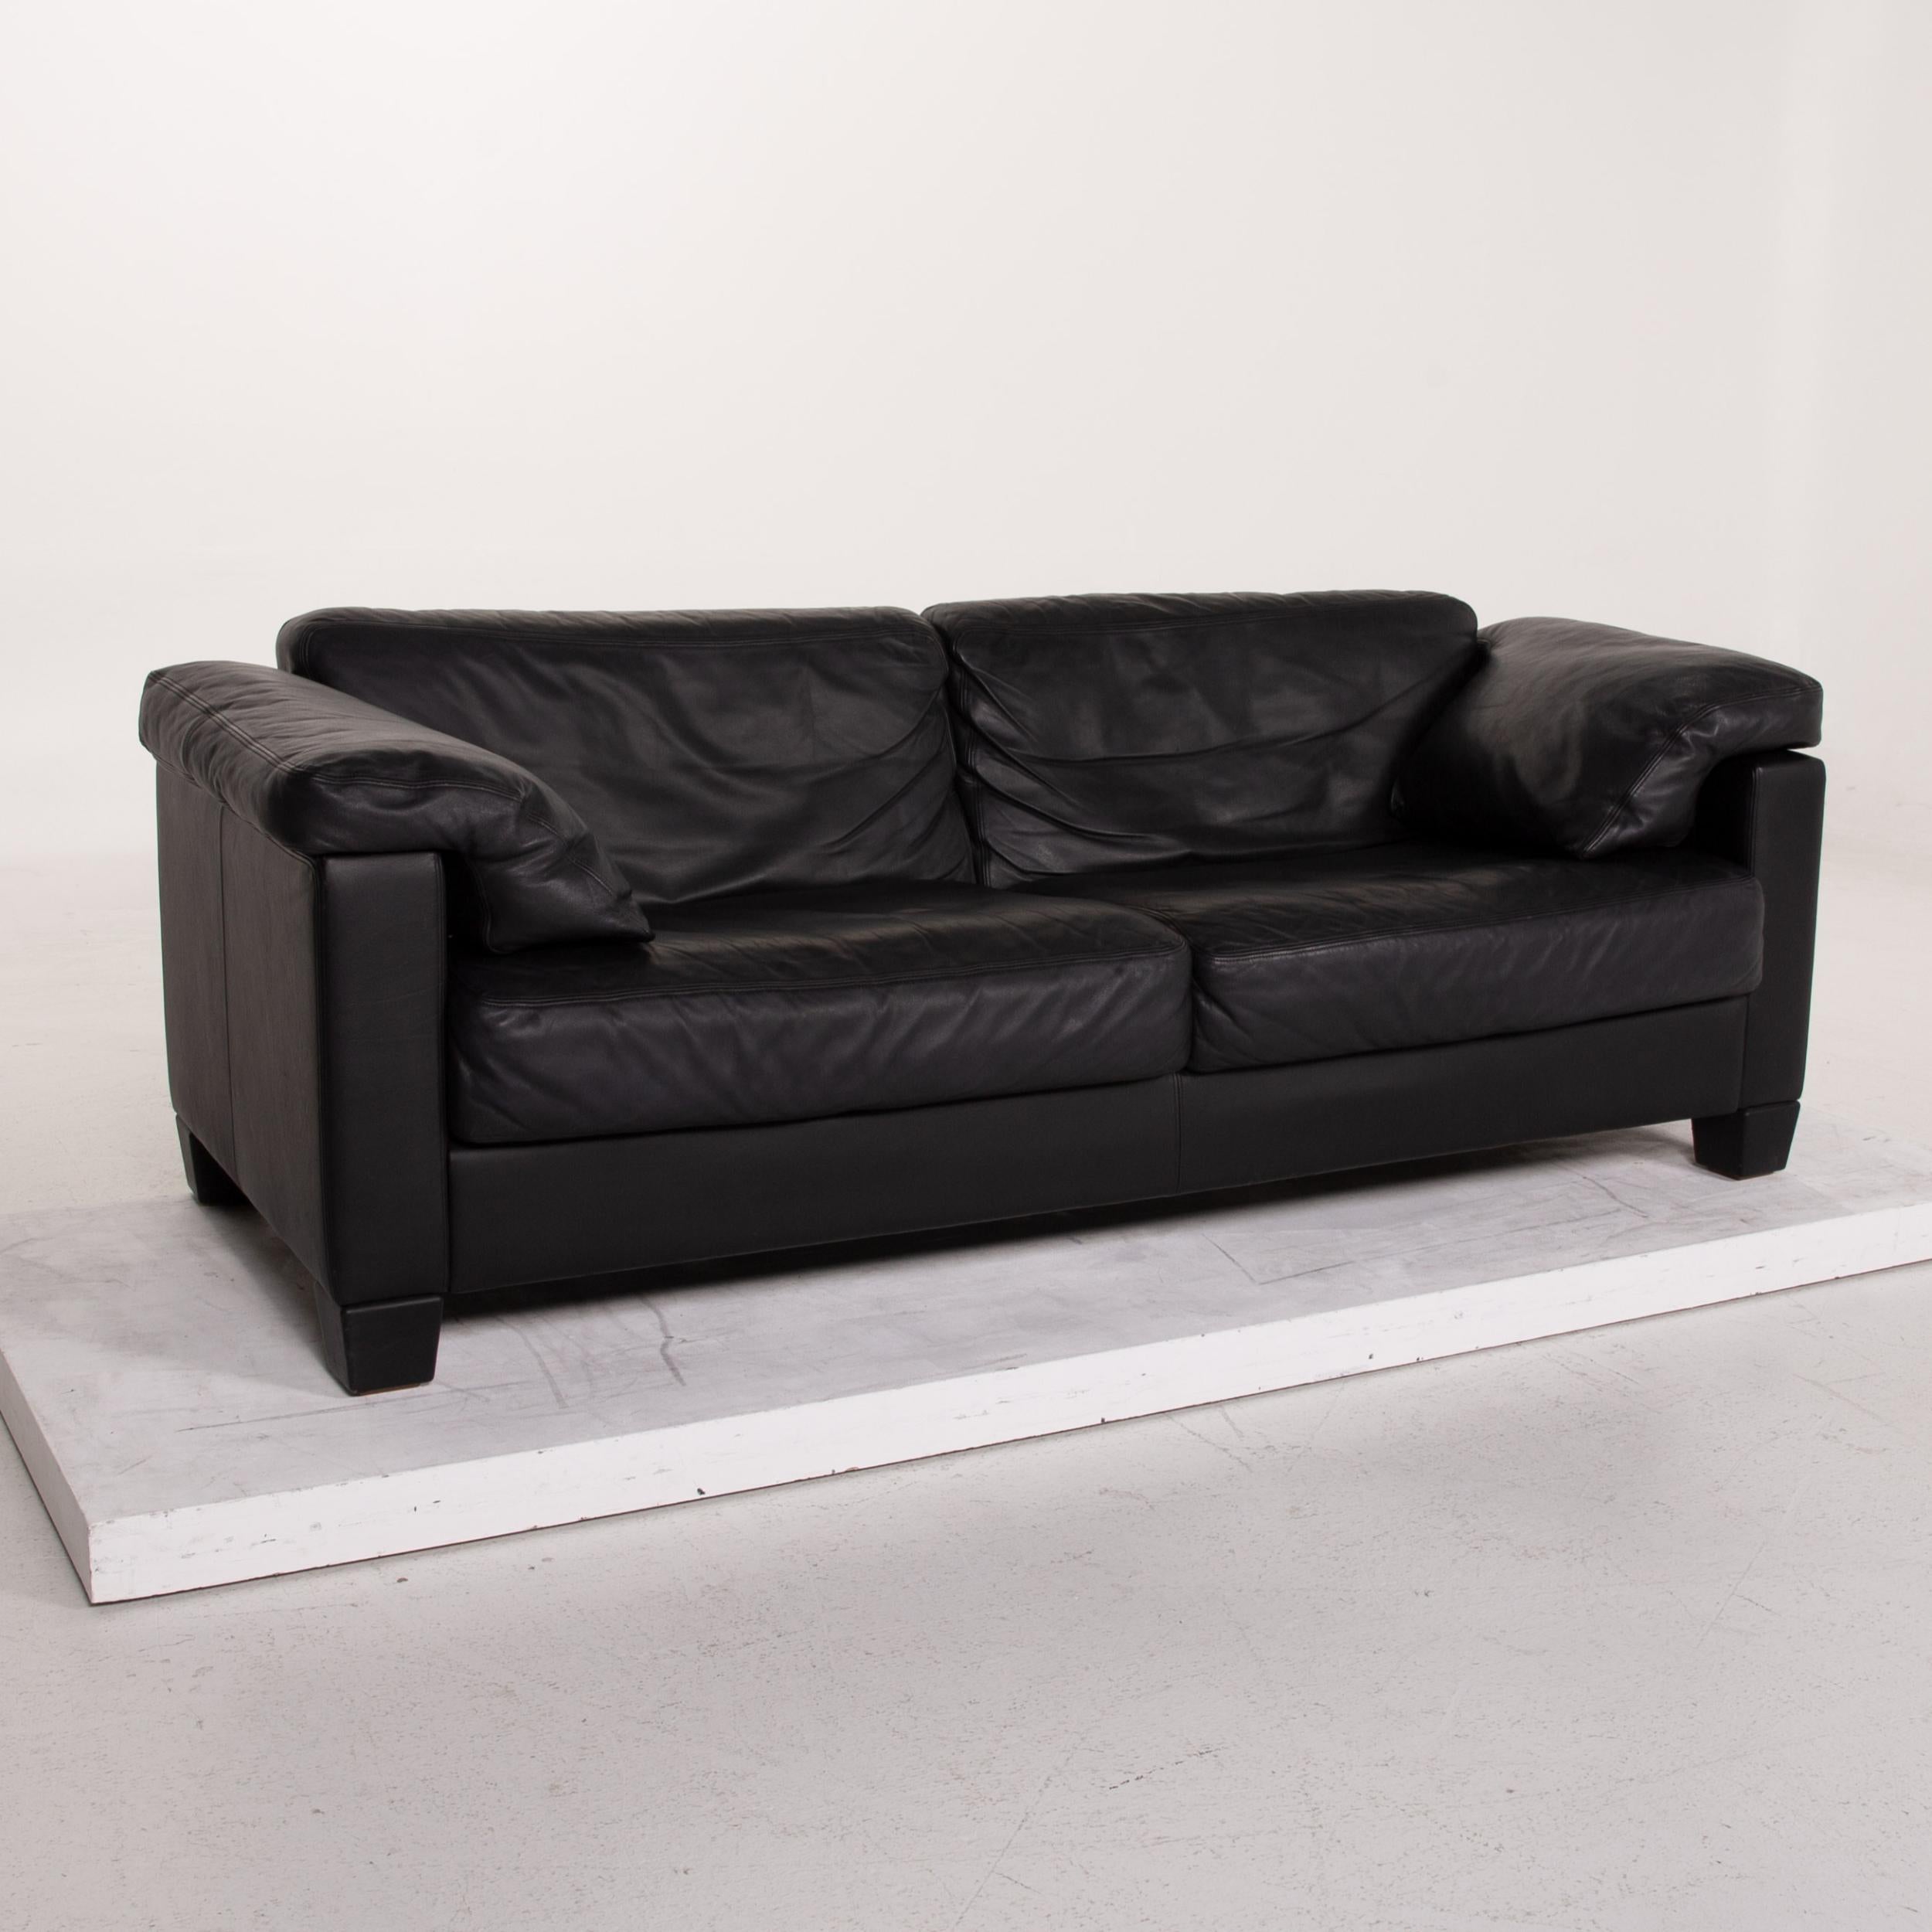 Contemporary De Sede Ds 17 Leather Sofa Black Two-Seat For Sale